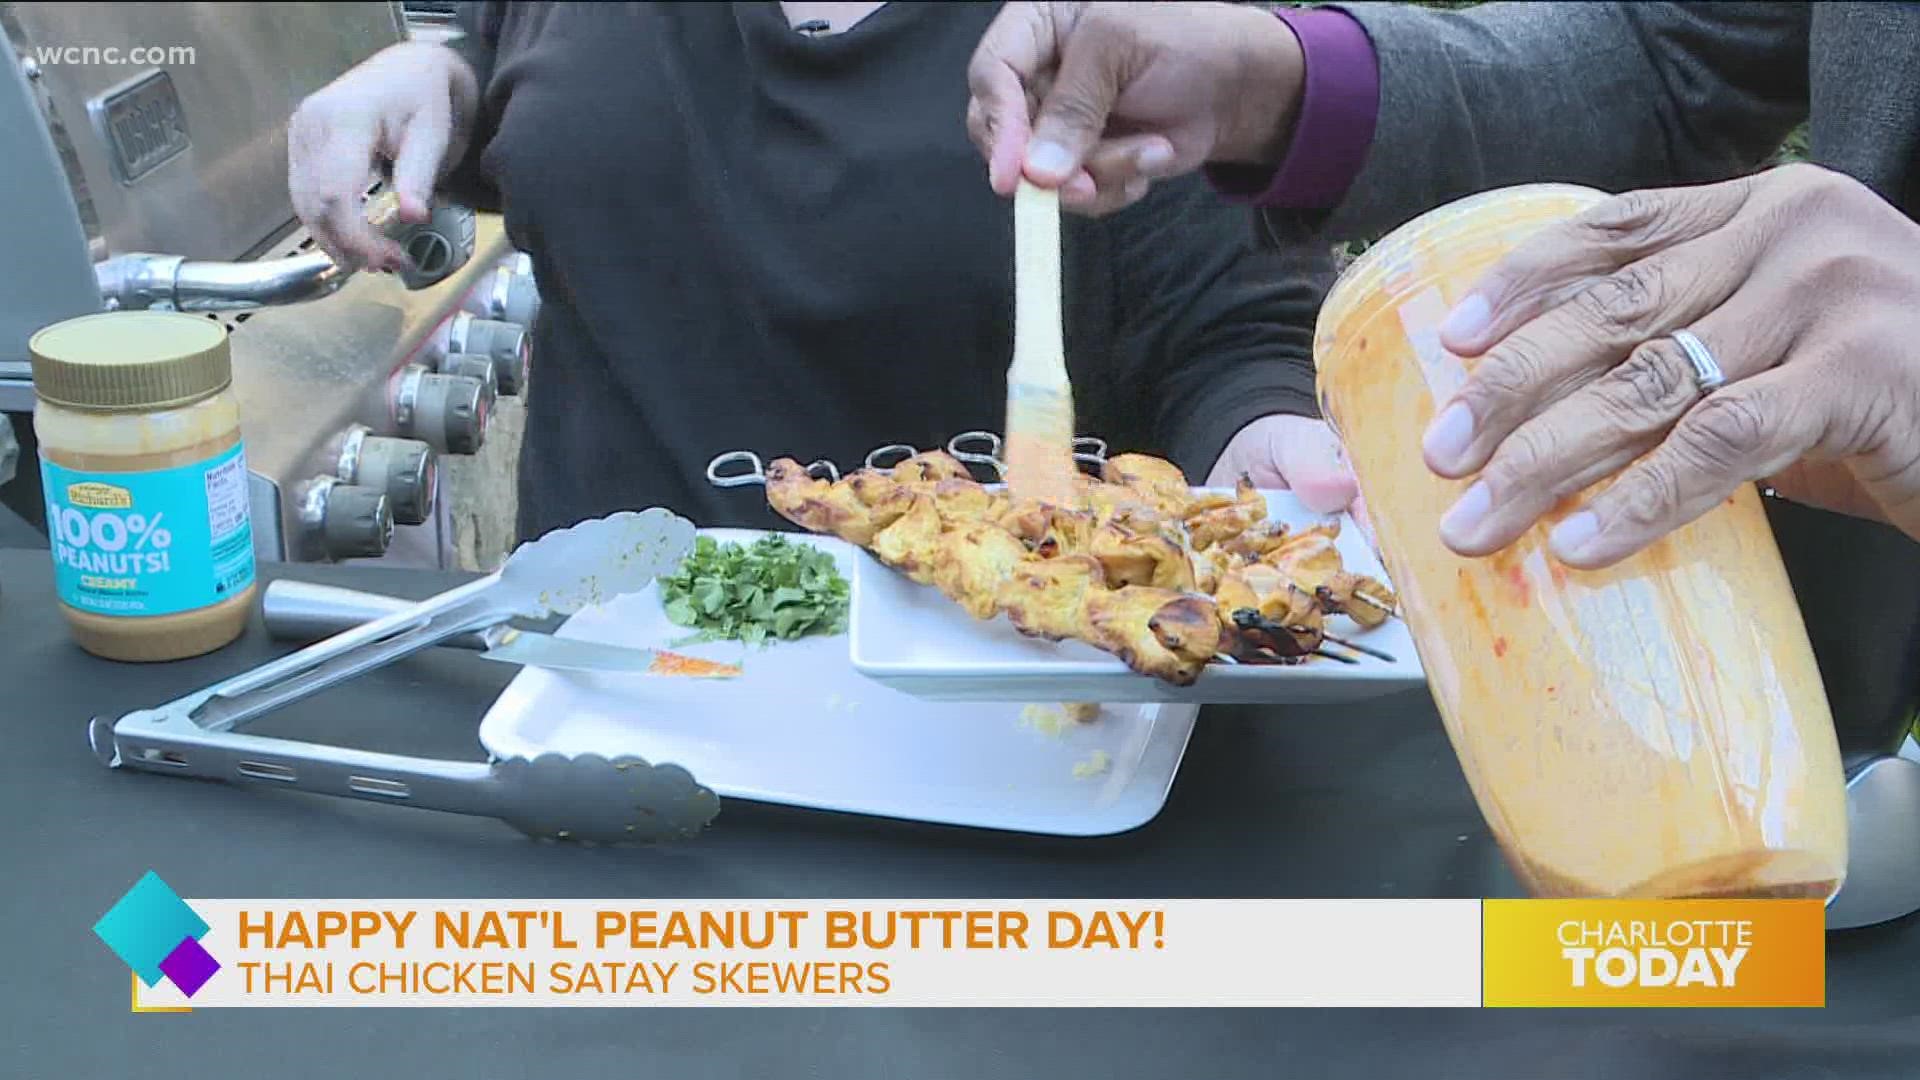 Davidson Ice House owner and chef serves up Thai option in honor of National Peanut Butter Day